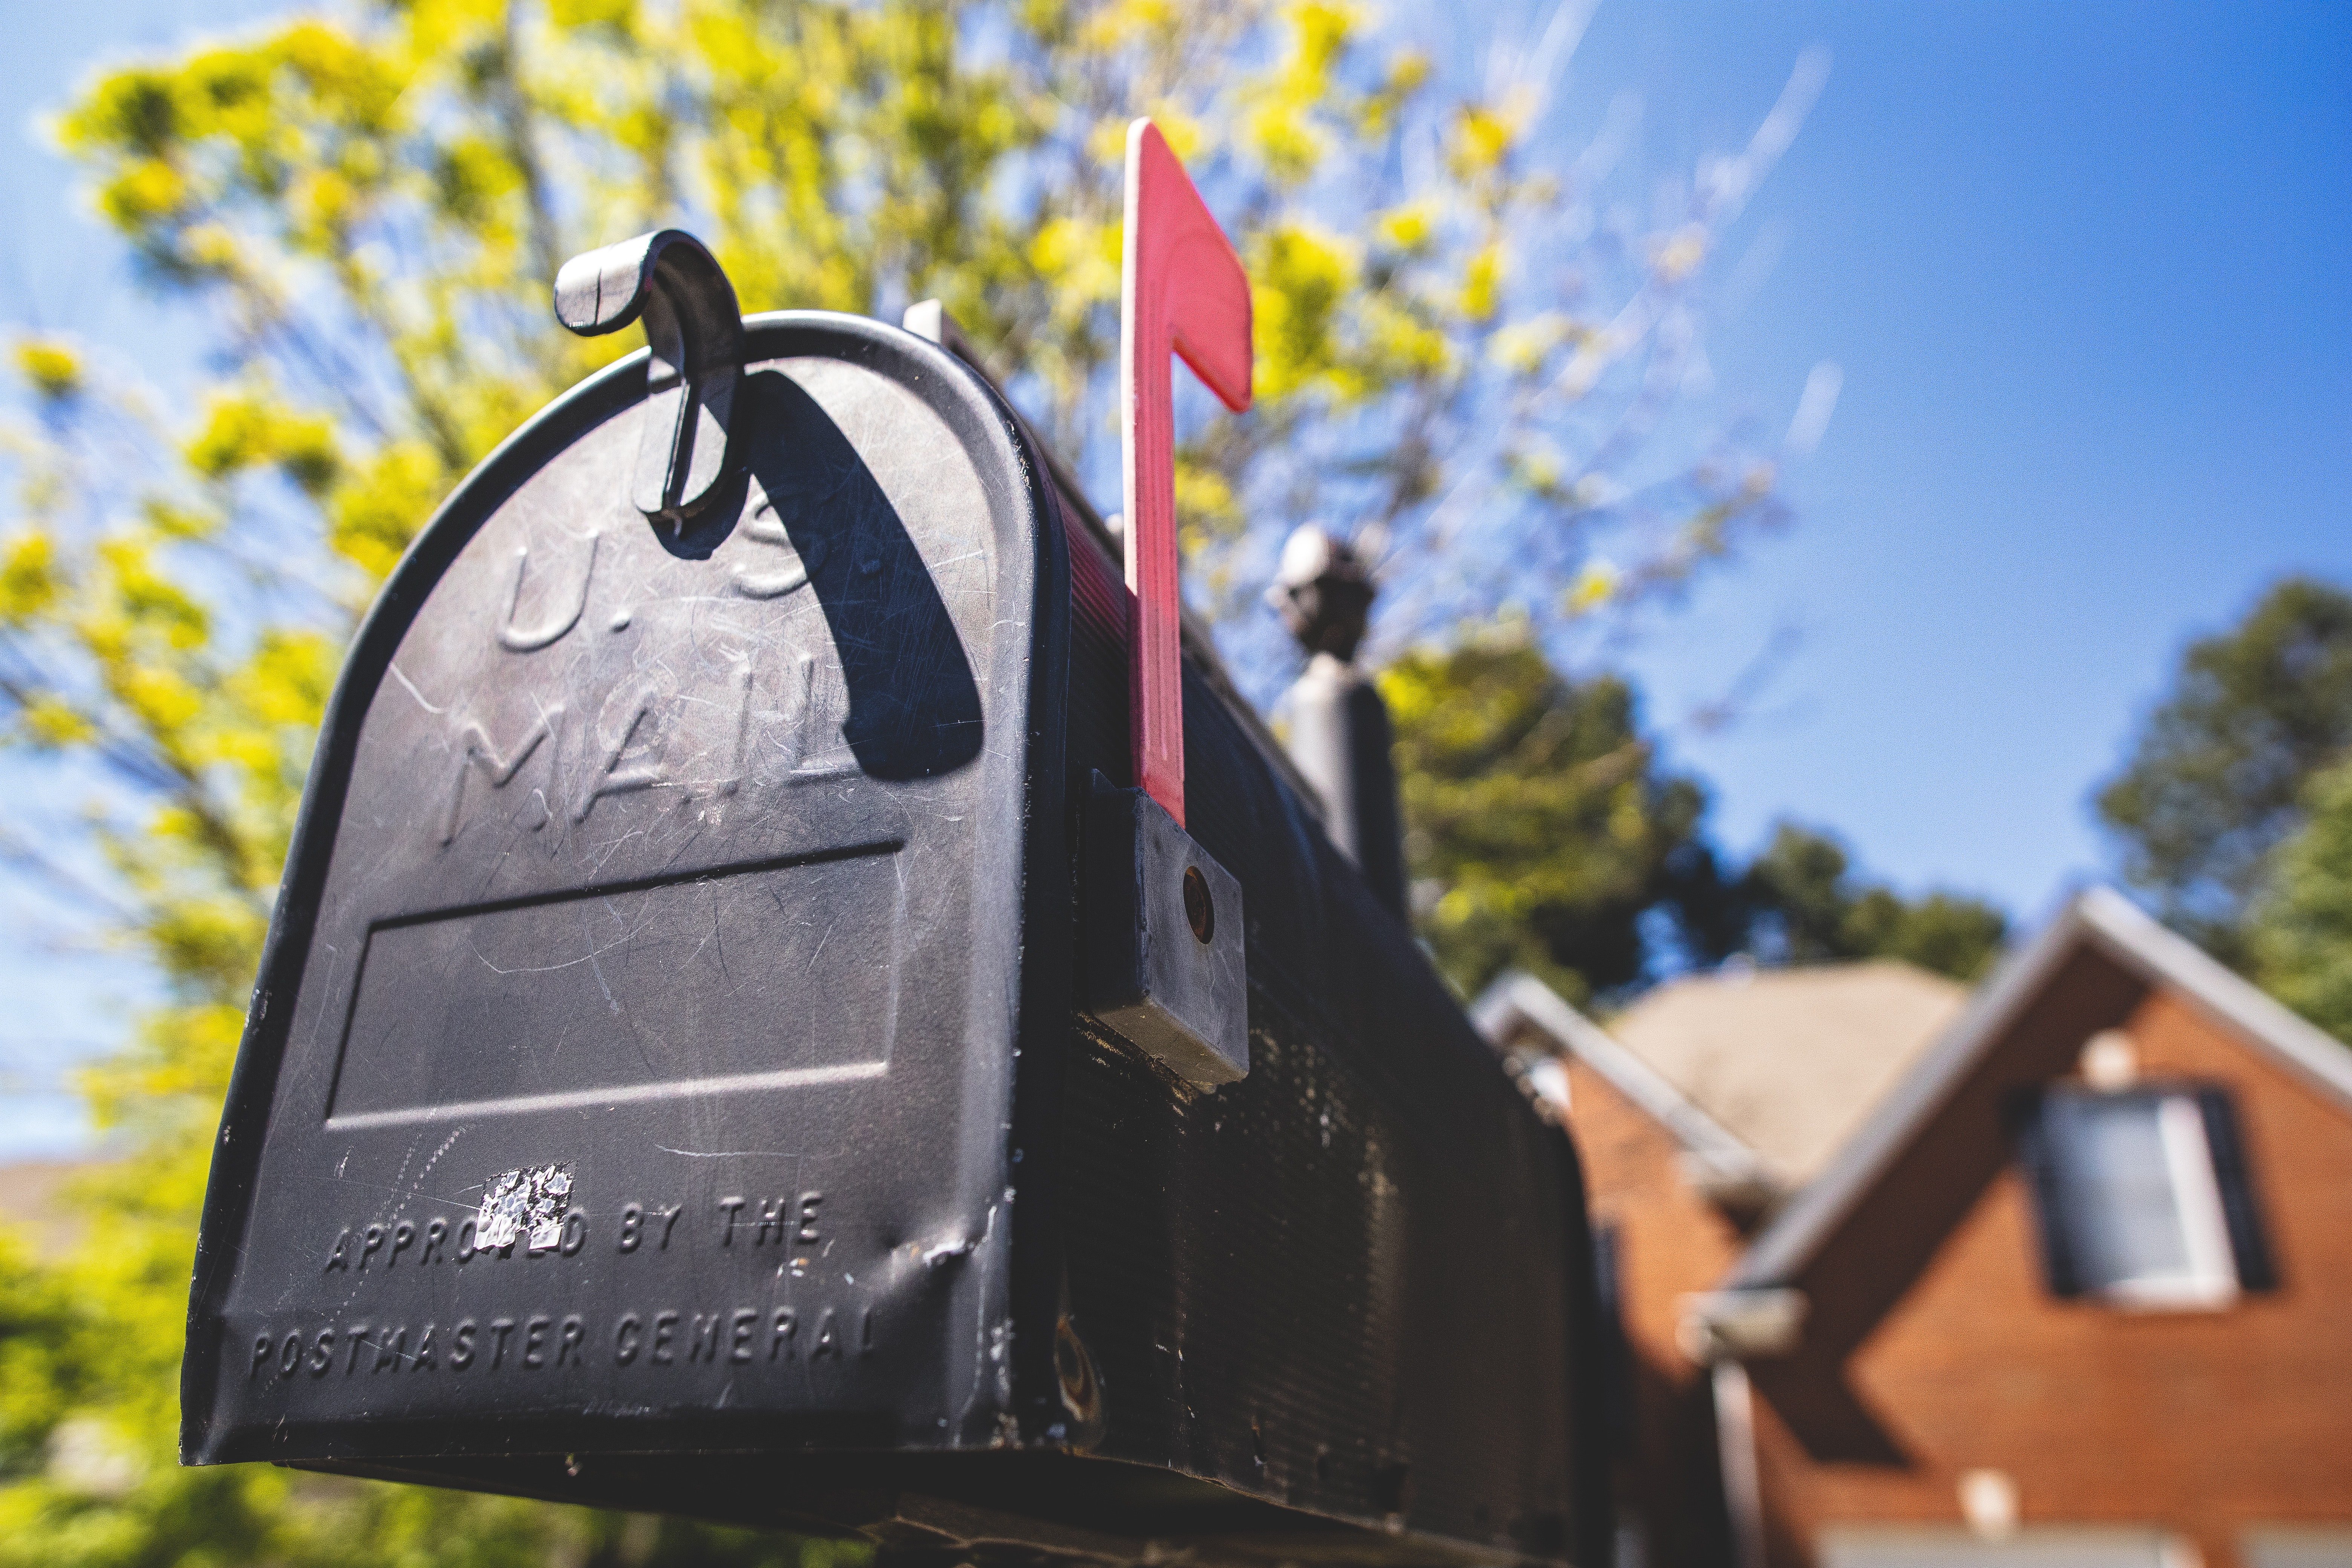 Black Mailbox with Red Flag Up